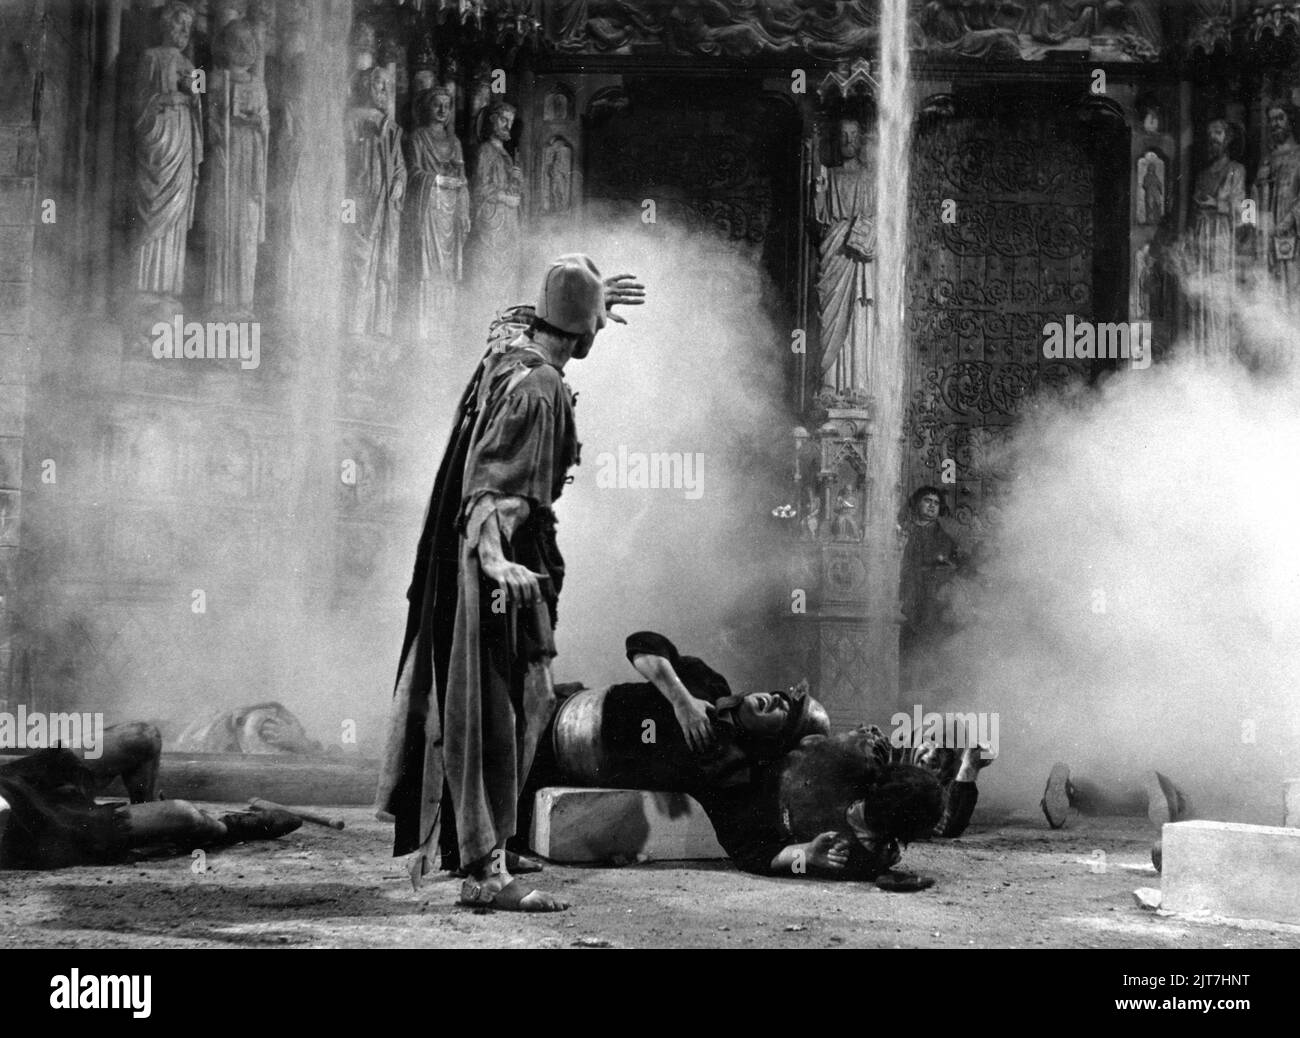 Steam from Molten Lead sprayed by Quasimodo onto Beggars outside the Cathedral in THE HUNCHBACK OF NOTRE DAME / NOTRE DAME DE PARIS 1956 director JEAN DELANNOY novel Victor Hugo adaptation / dialogue Jean Aurenche and Jacques Prevert music Georges Auric costume design Georges Benda production design Rene Renoux choreographer Leonid Massine producers Raymond and Robert Hakim France - Italy co-production Paris Film Productions / Panitalia Stock Photo